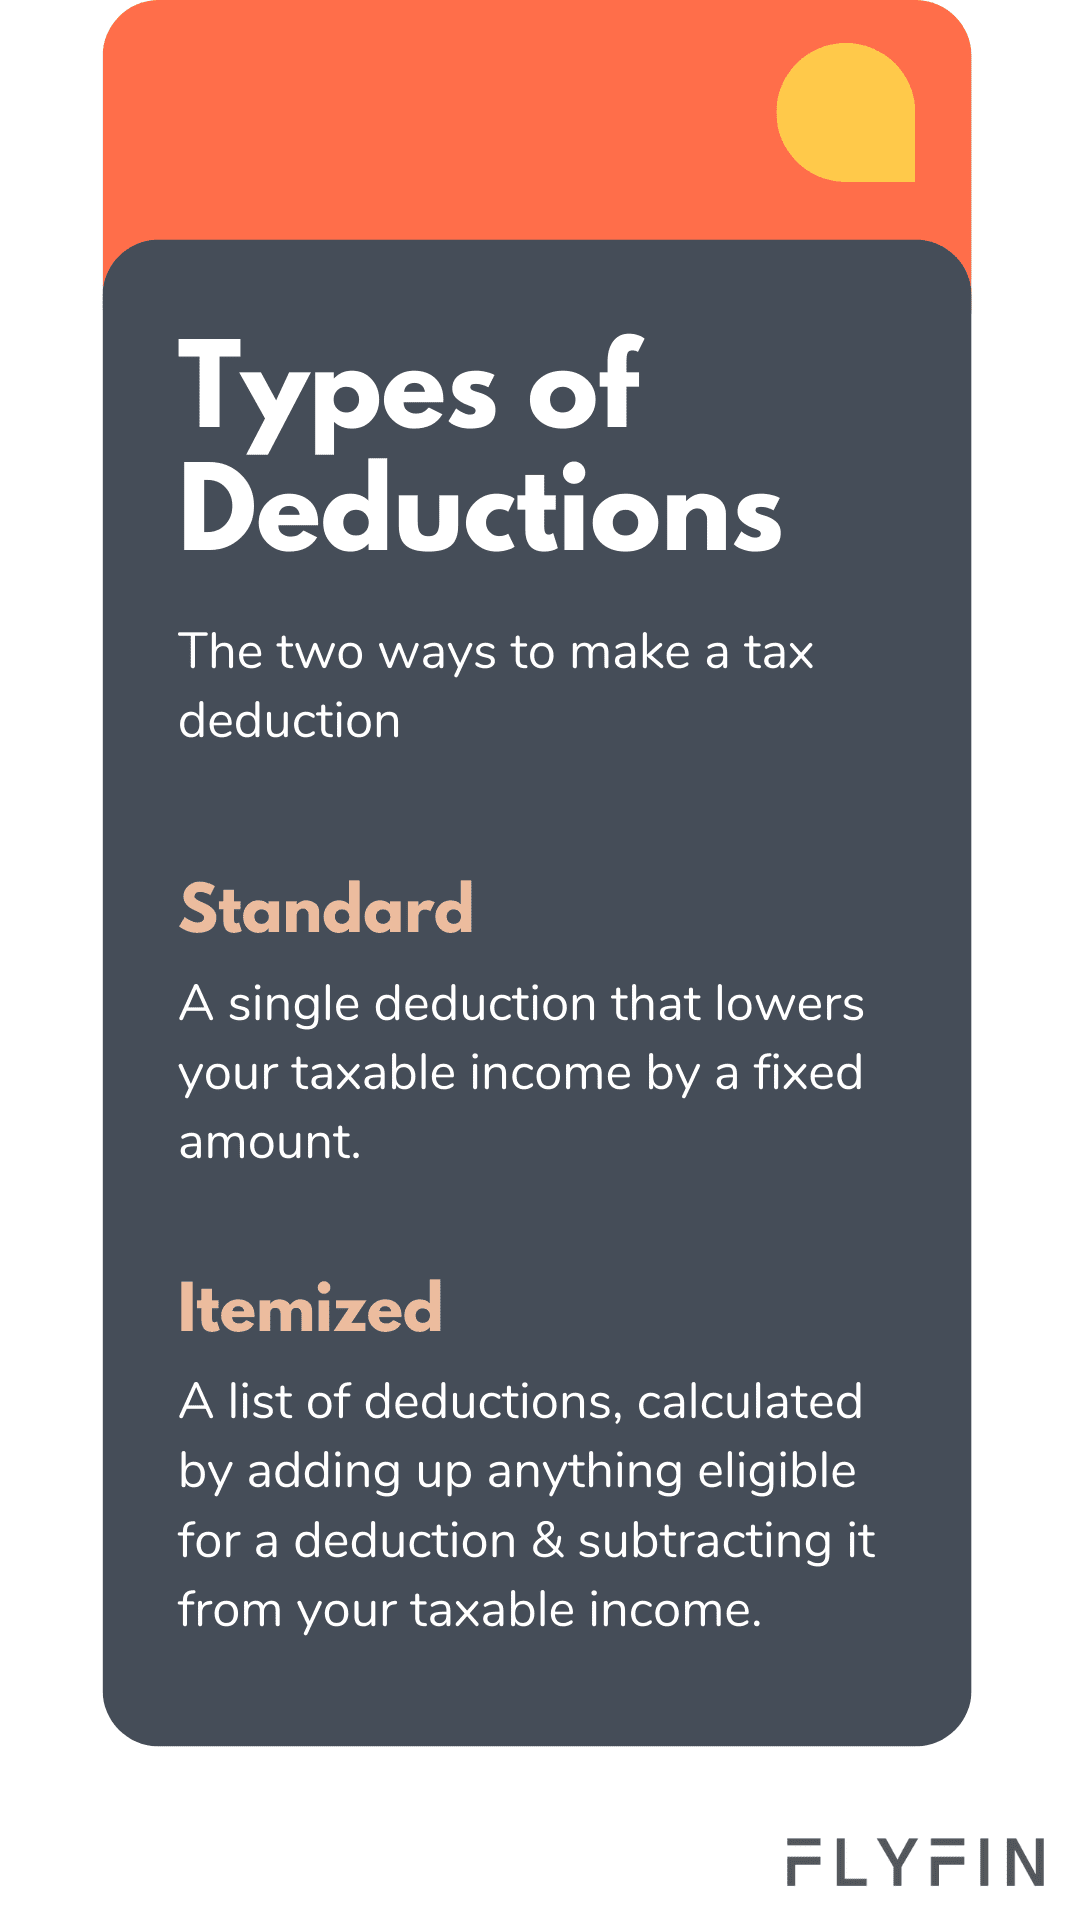 What is a tax deduction?